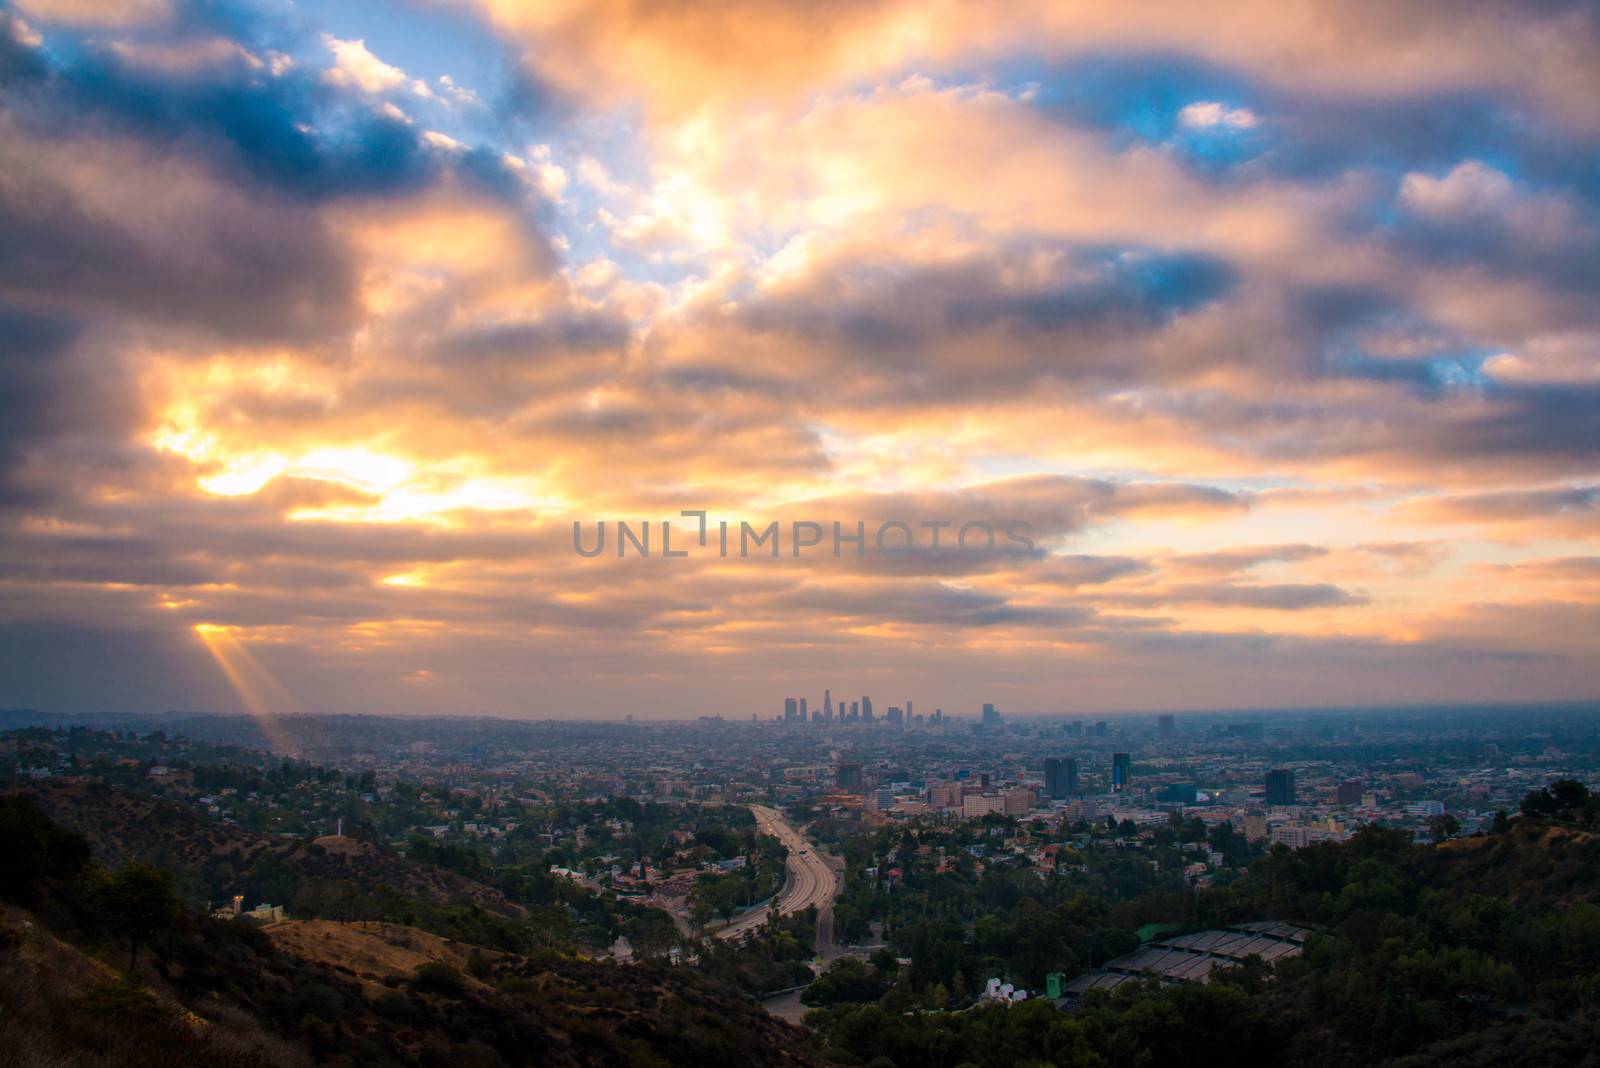 Los Angeles from the Hollywood Bowl Overlook by CelsoDiniz